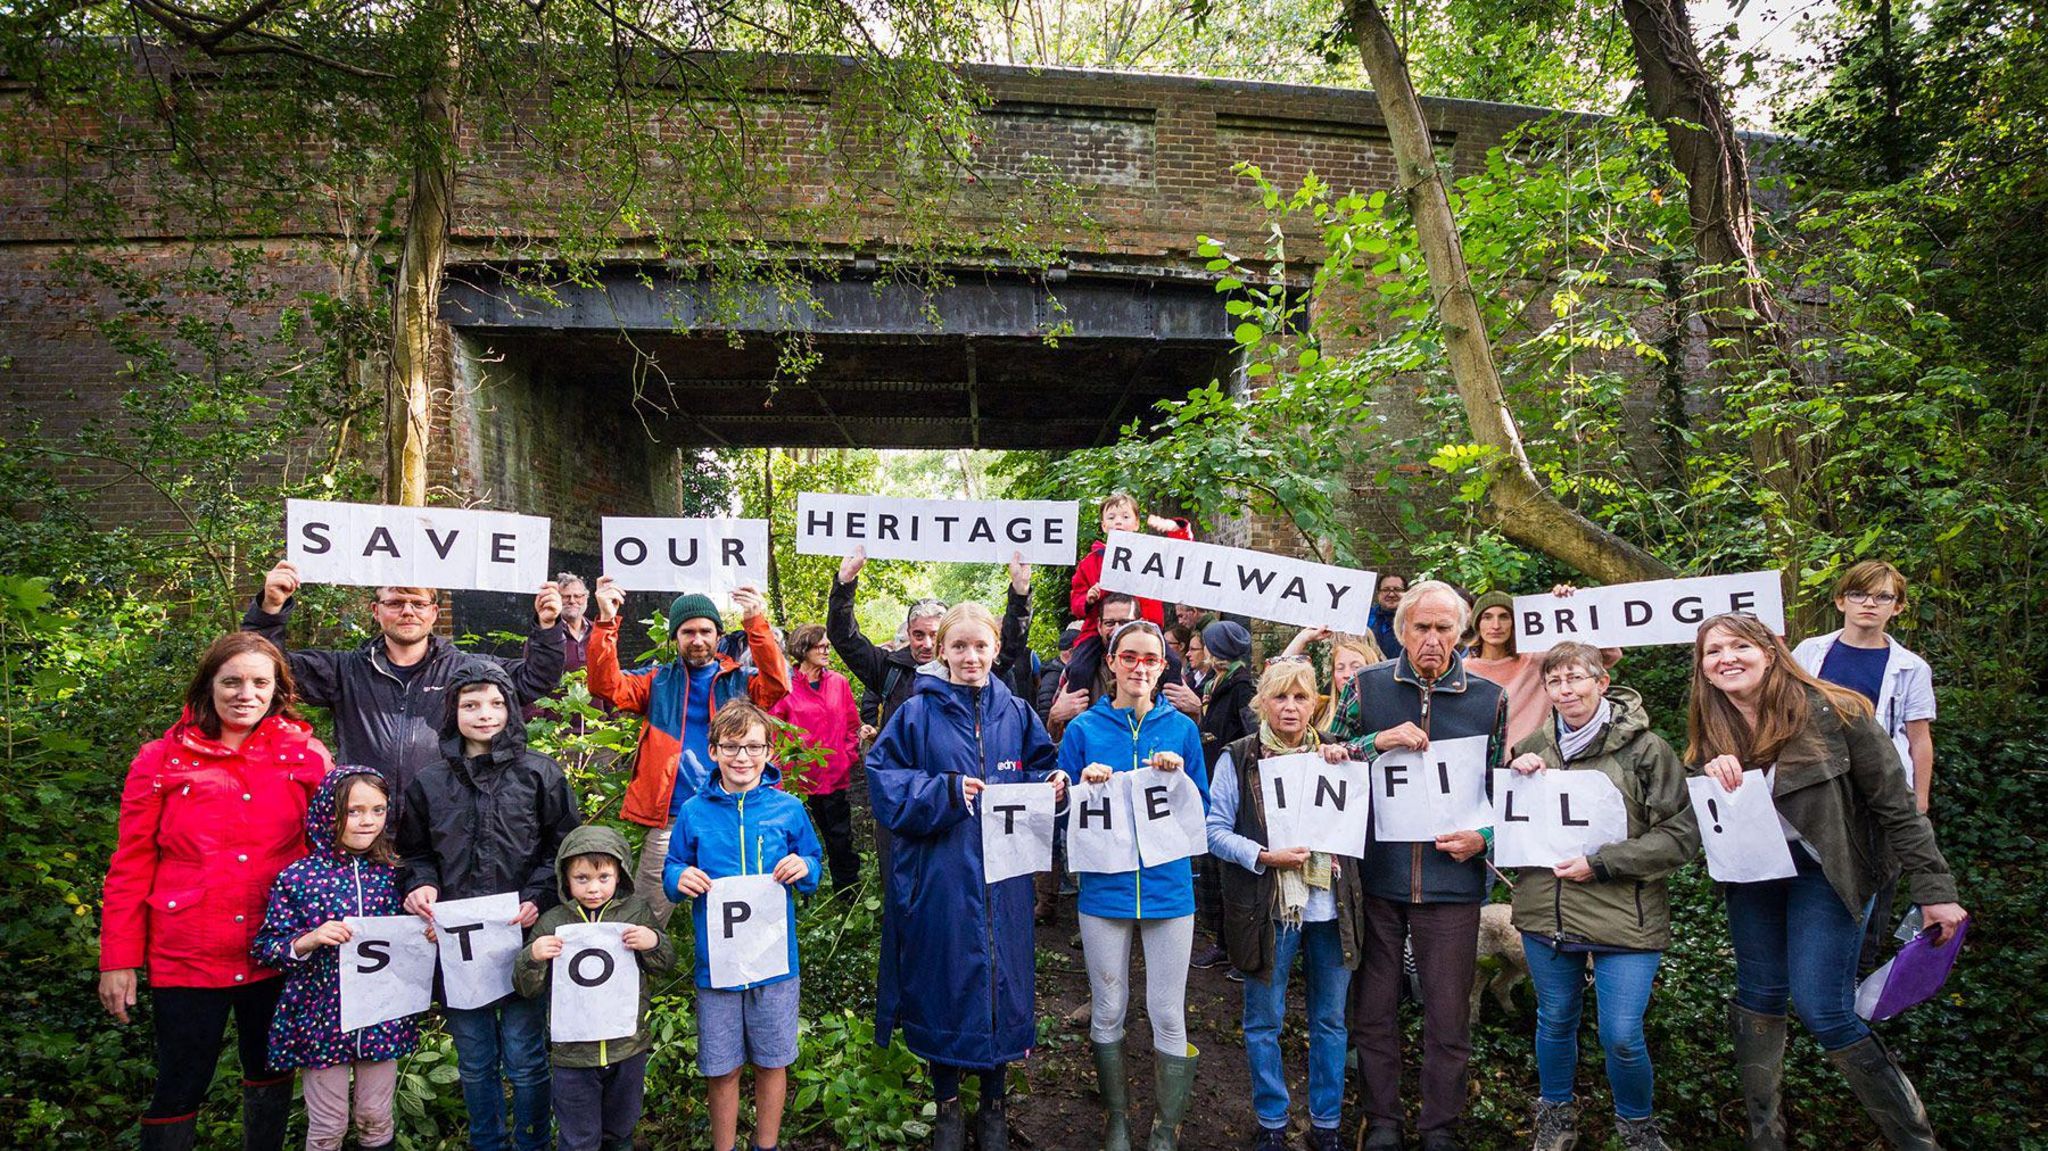 A group of campaigners of all ages stand in front of the bridge in Barcombe holding bits of paper which read "Save our heritage railway bridge" and "stop the infill"